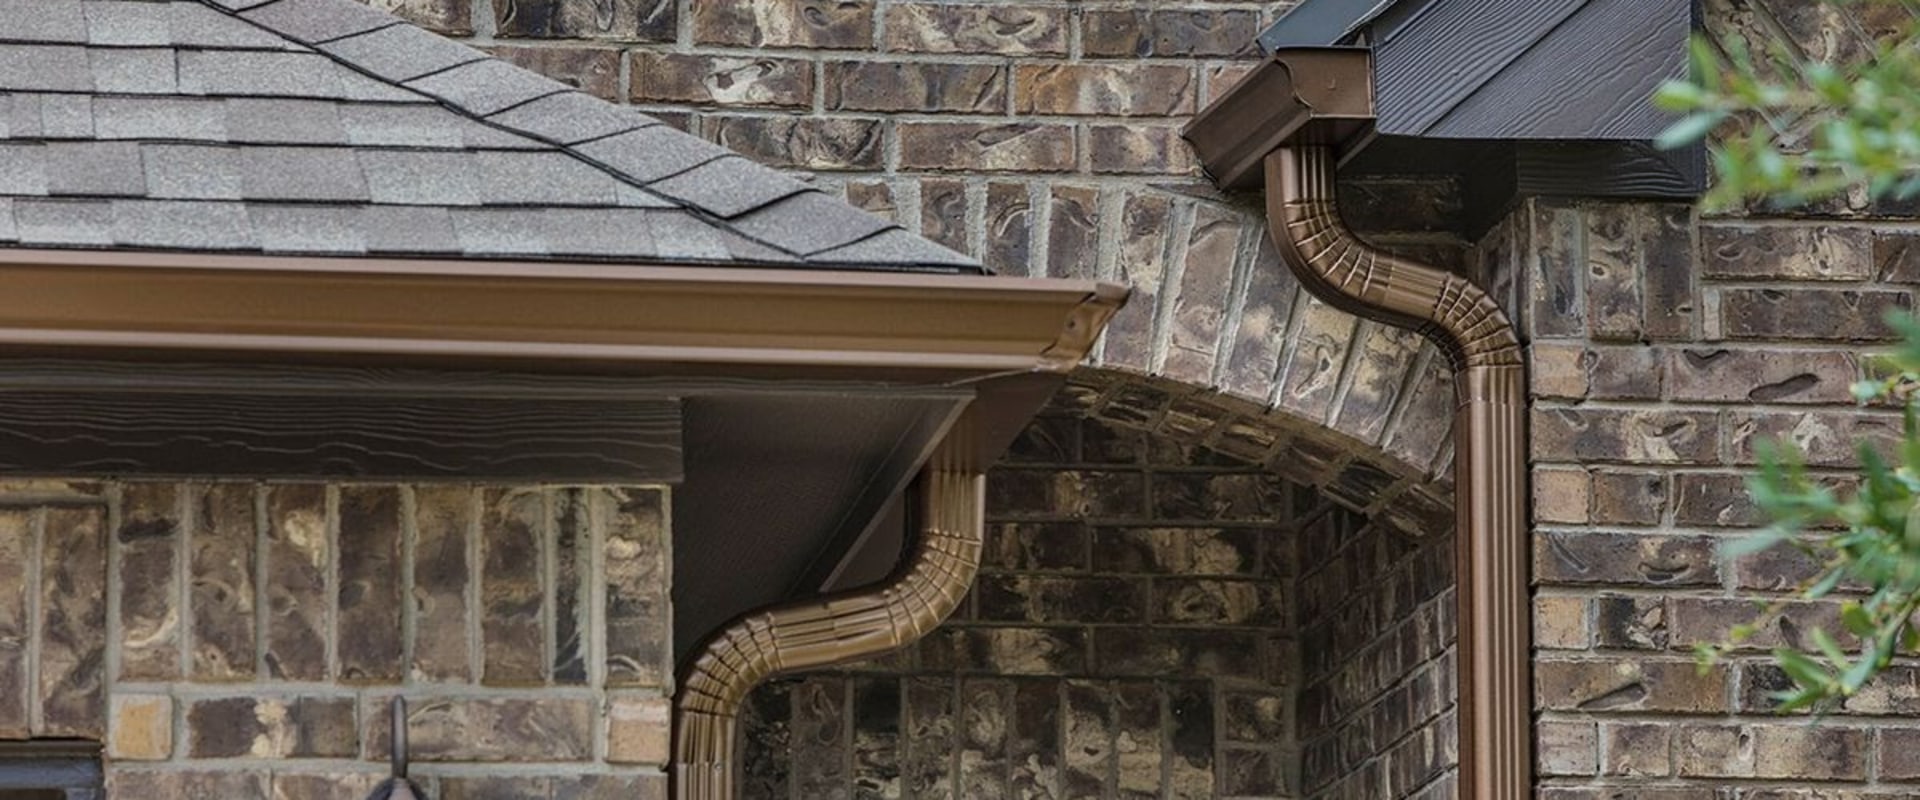 Should rain gutters be installed when replacing a roof in Texas?